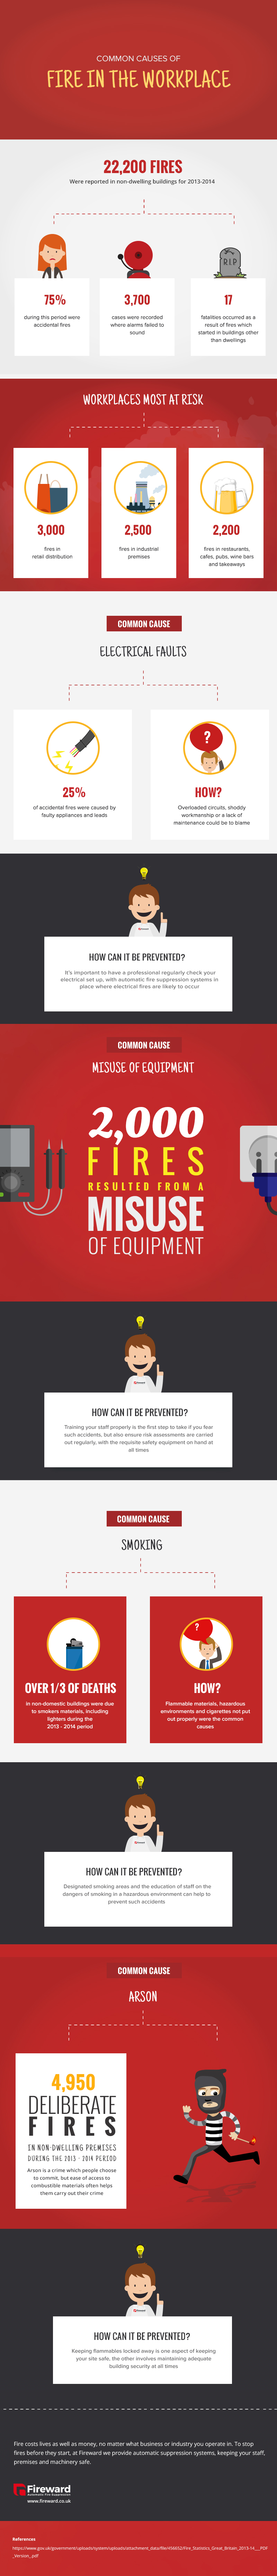 Common Causes of Fire in the Workplace